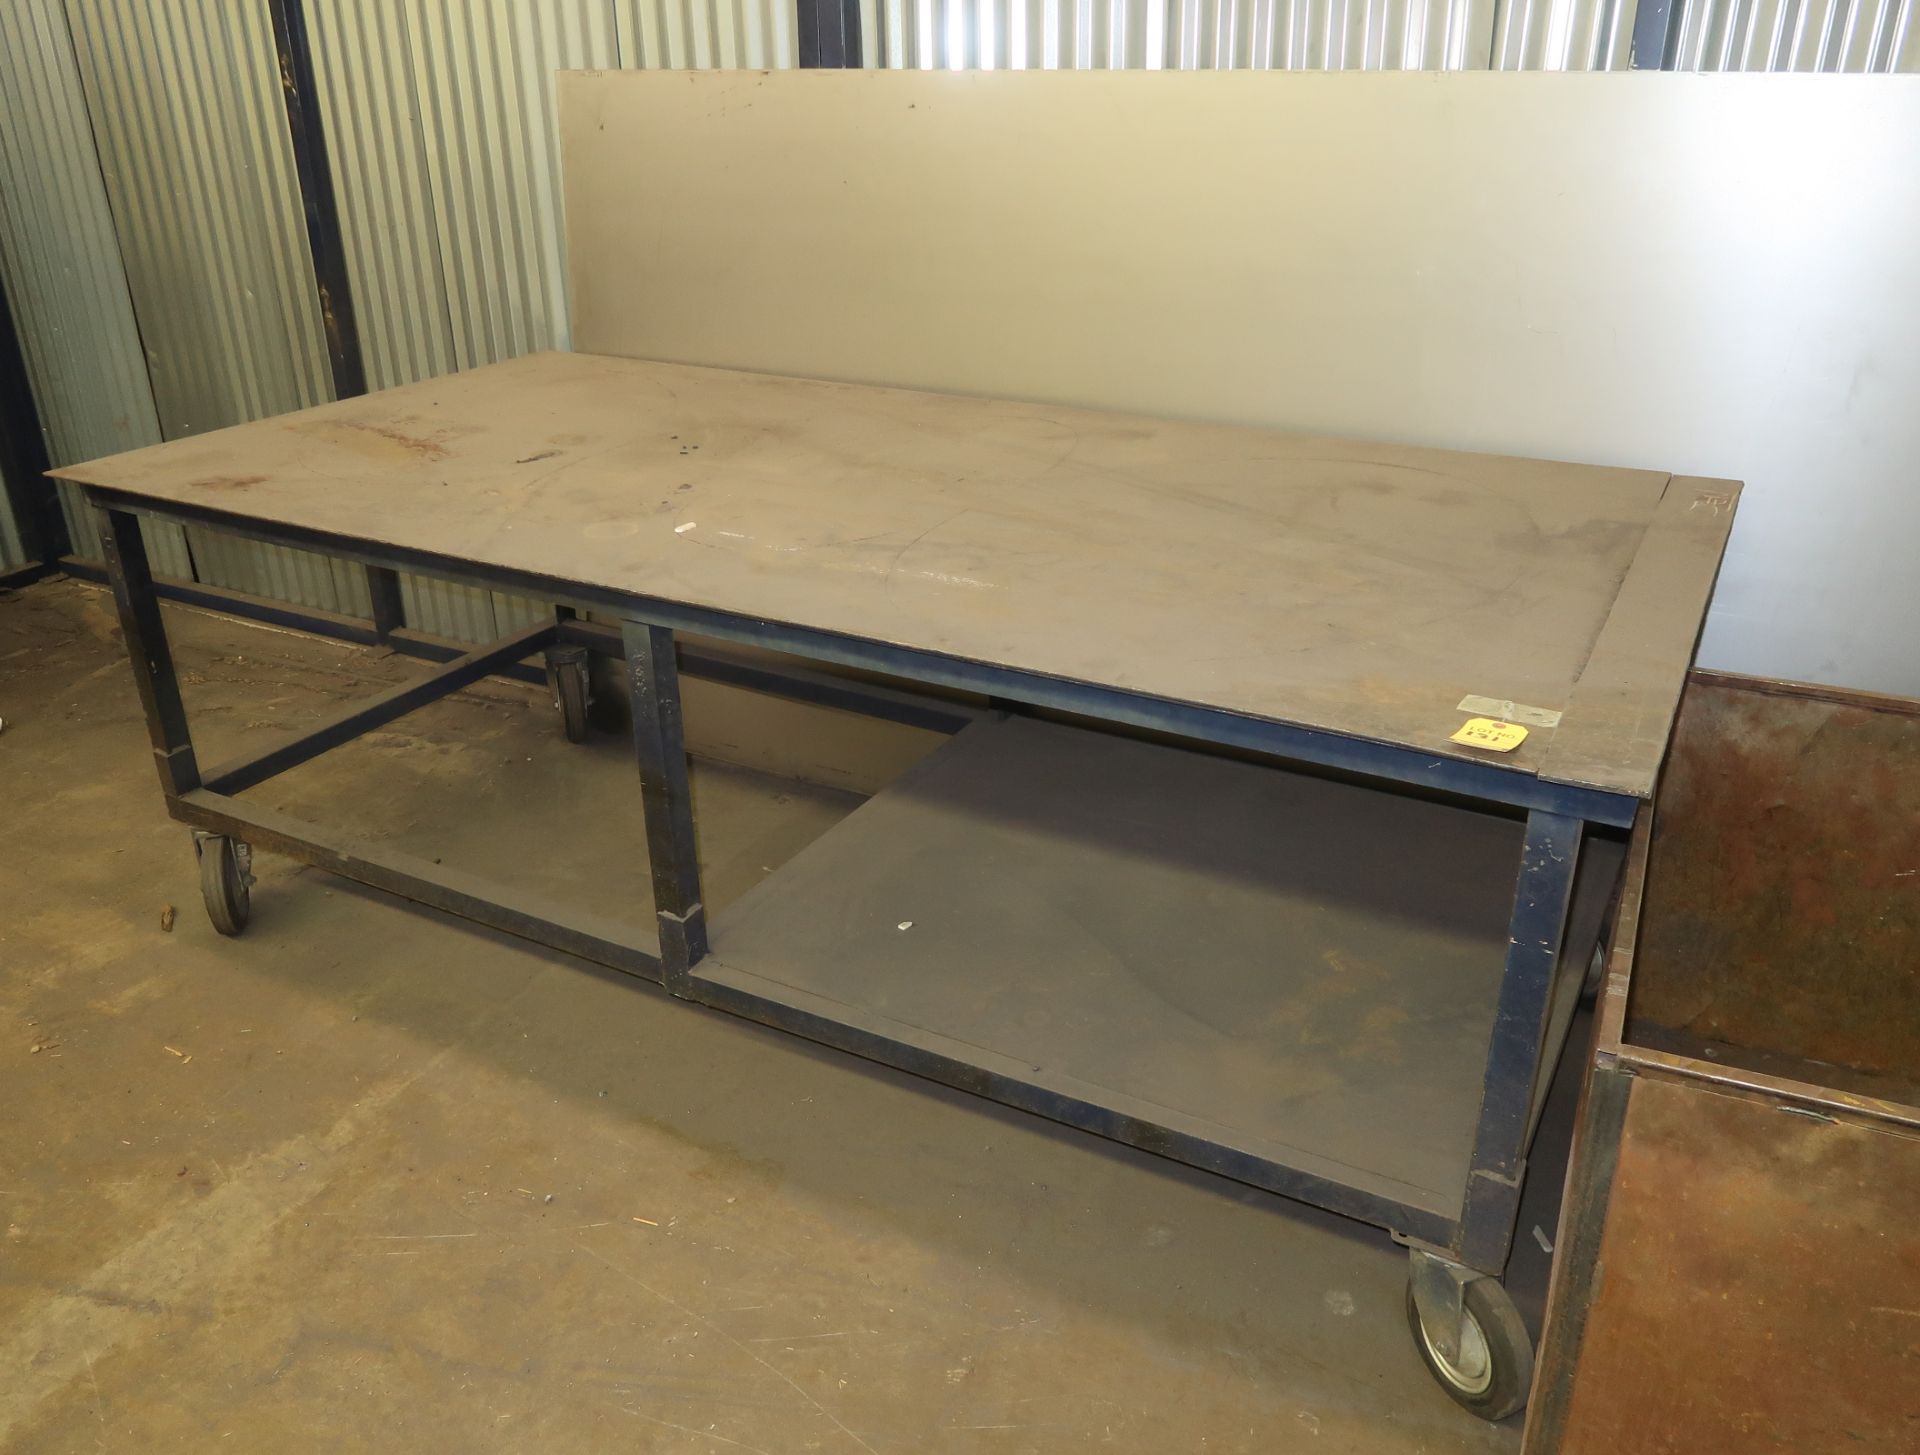 8' X 4' SETUP TABLE ON CASTERS